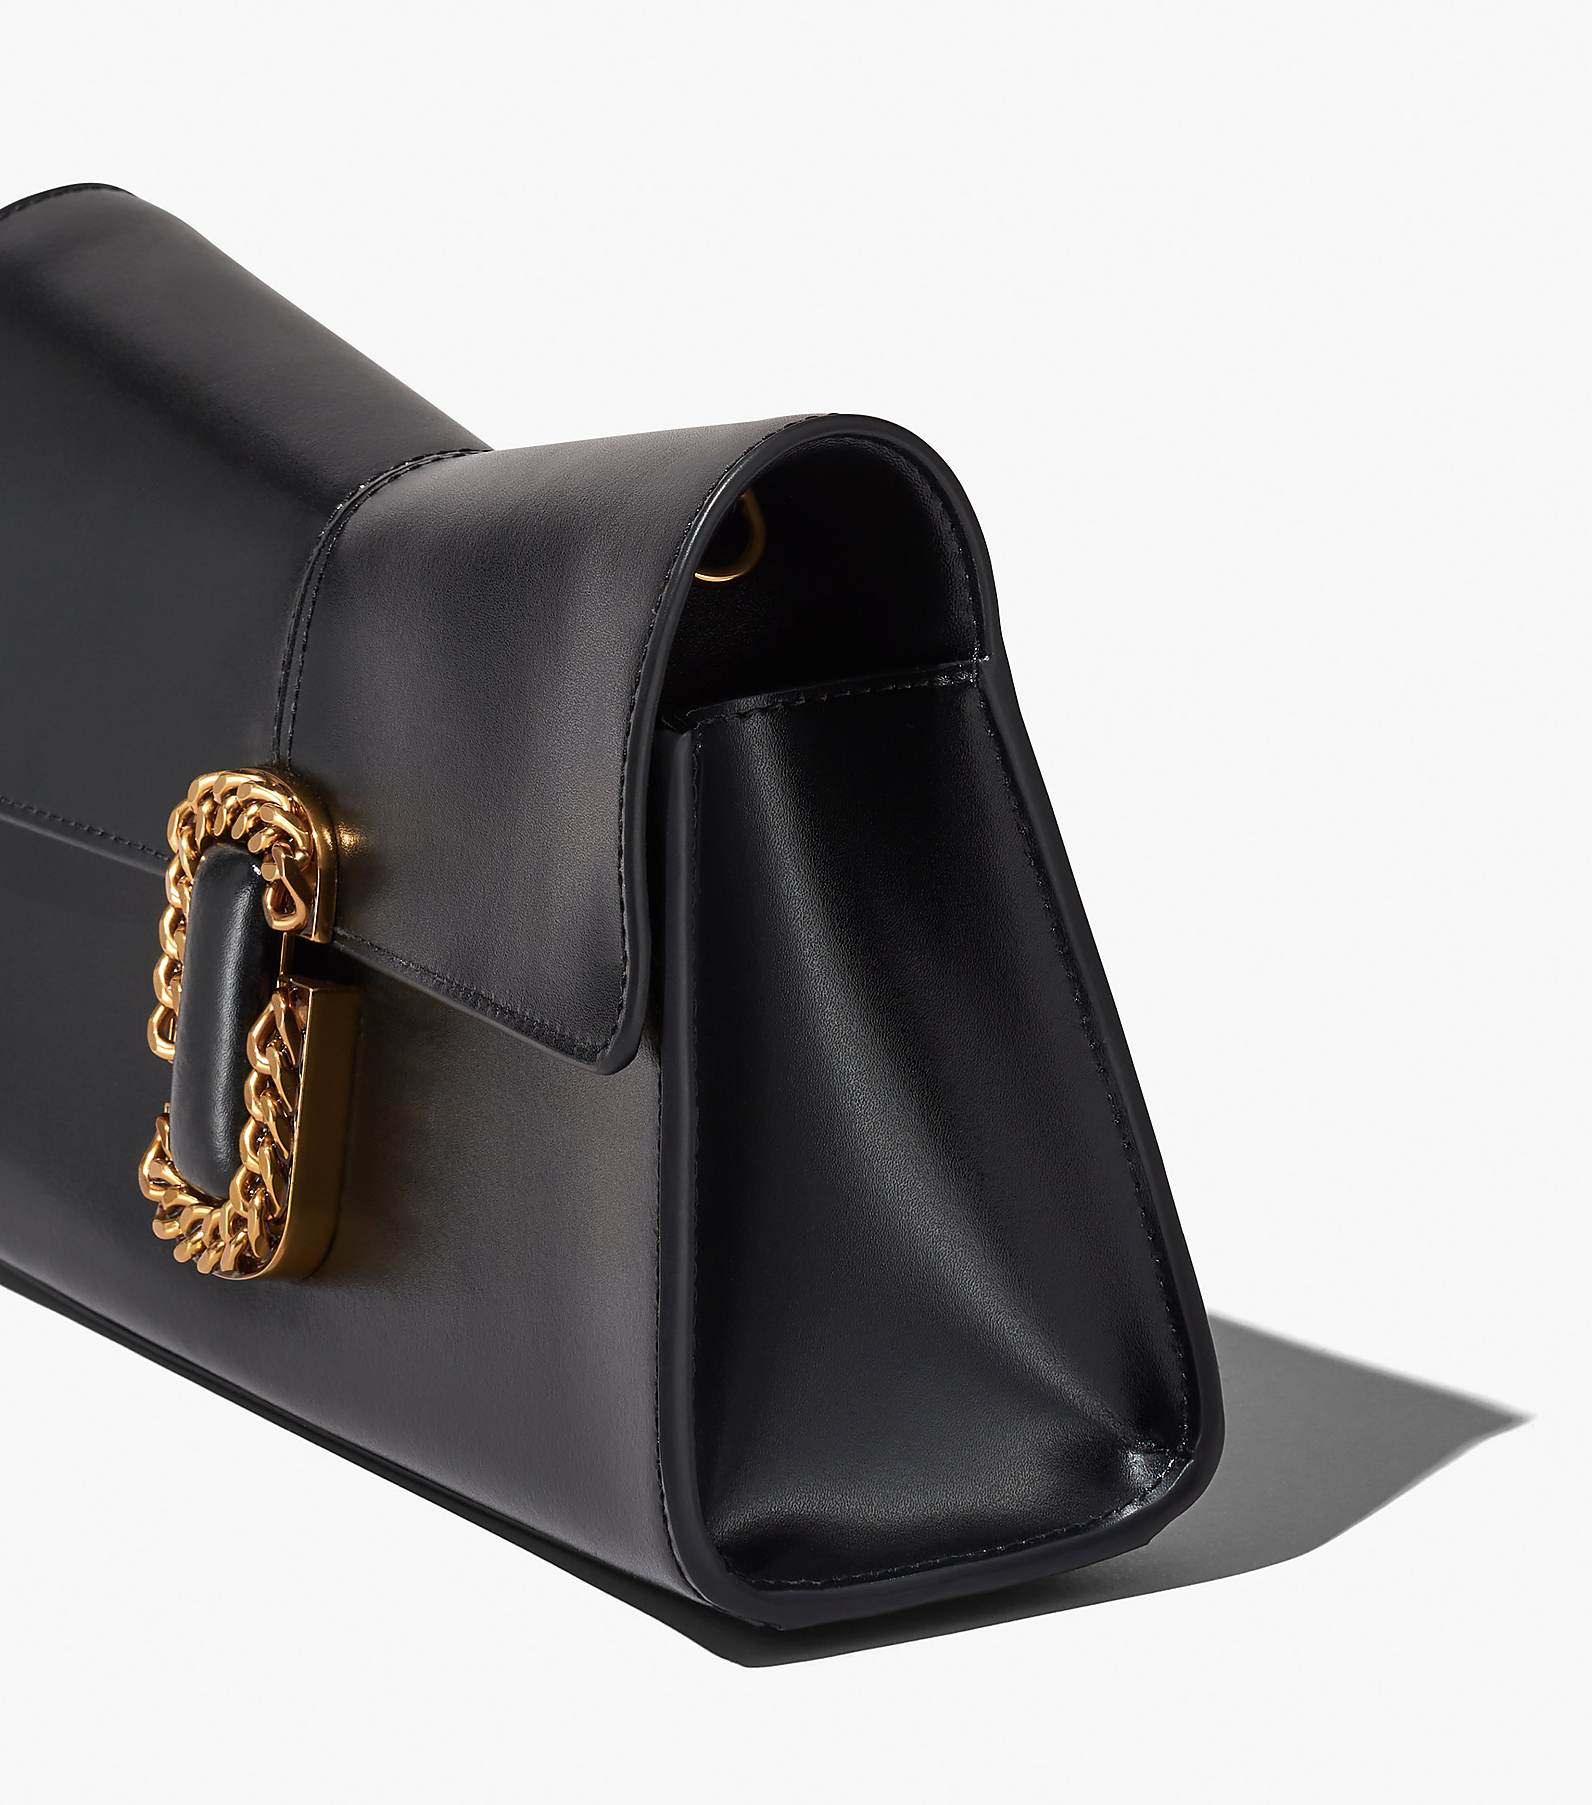 THE ST MARC CLUTCH